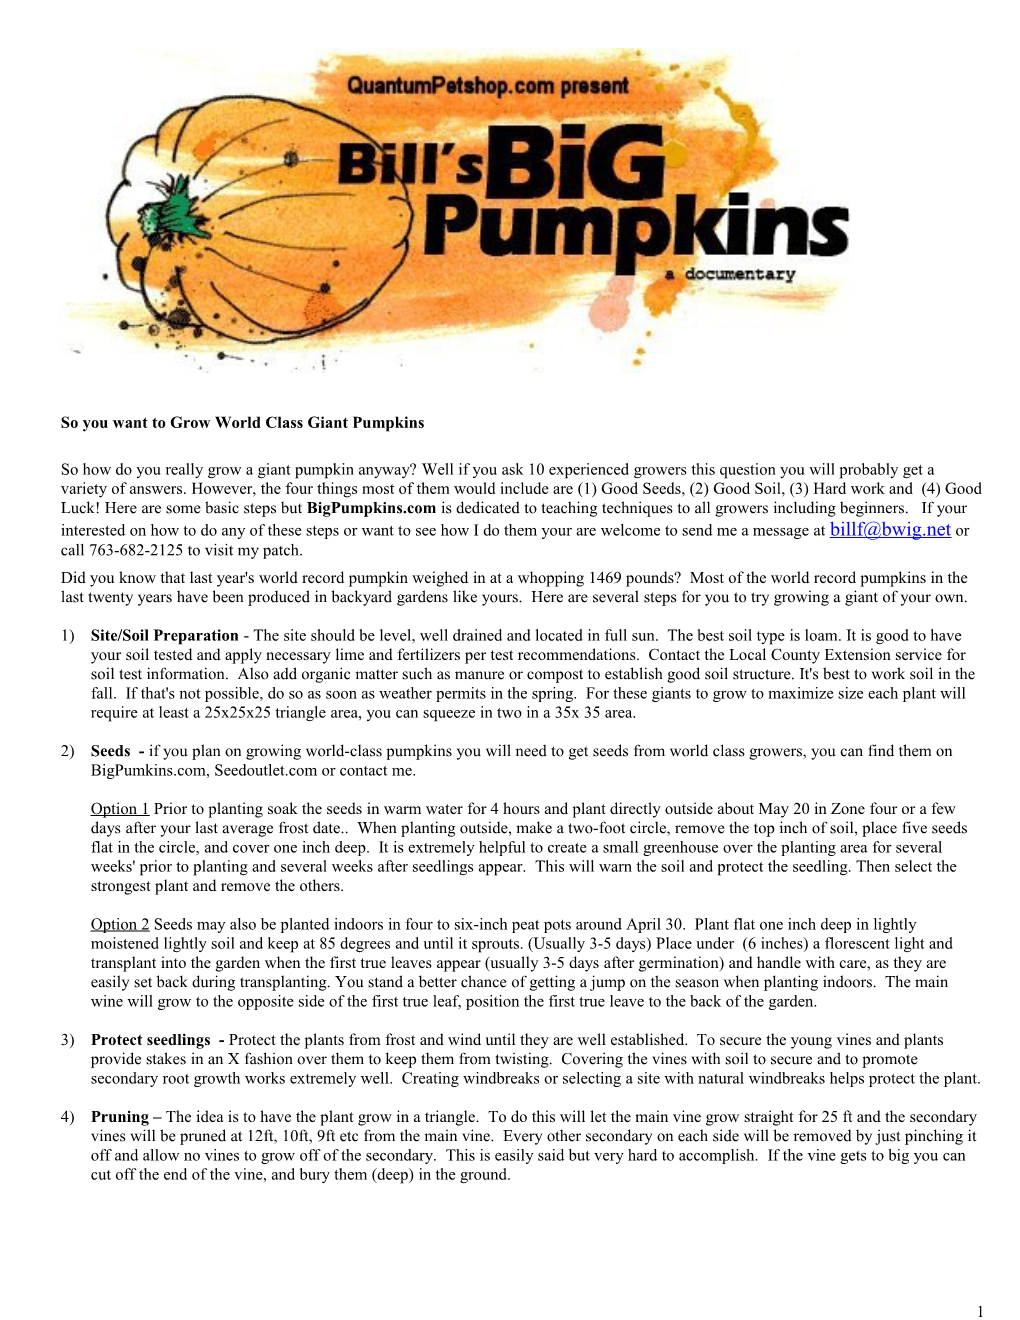 How to Growing the Giant Pumpkin